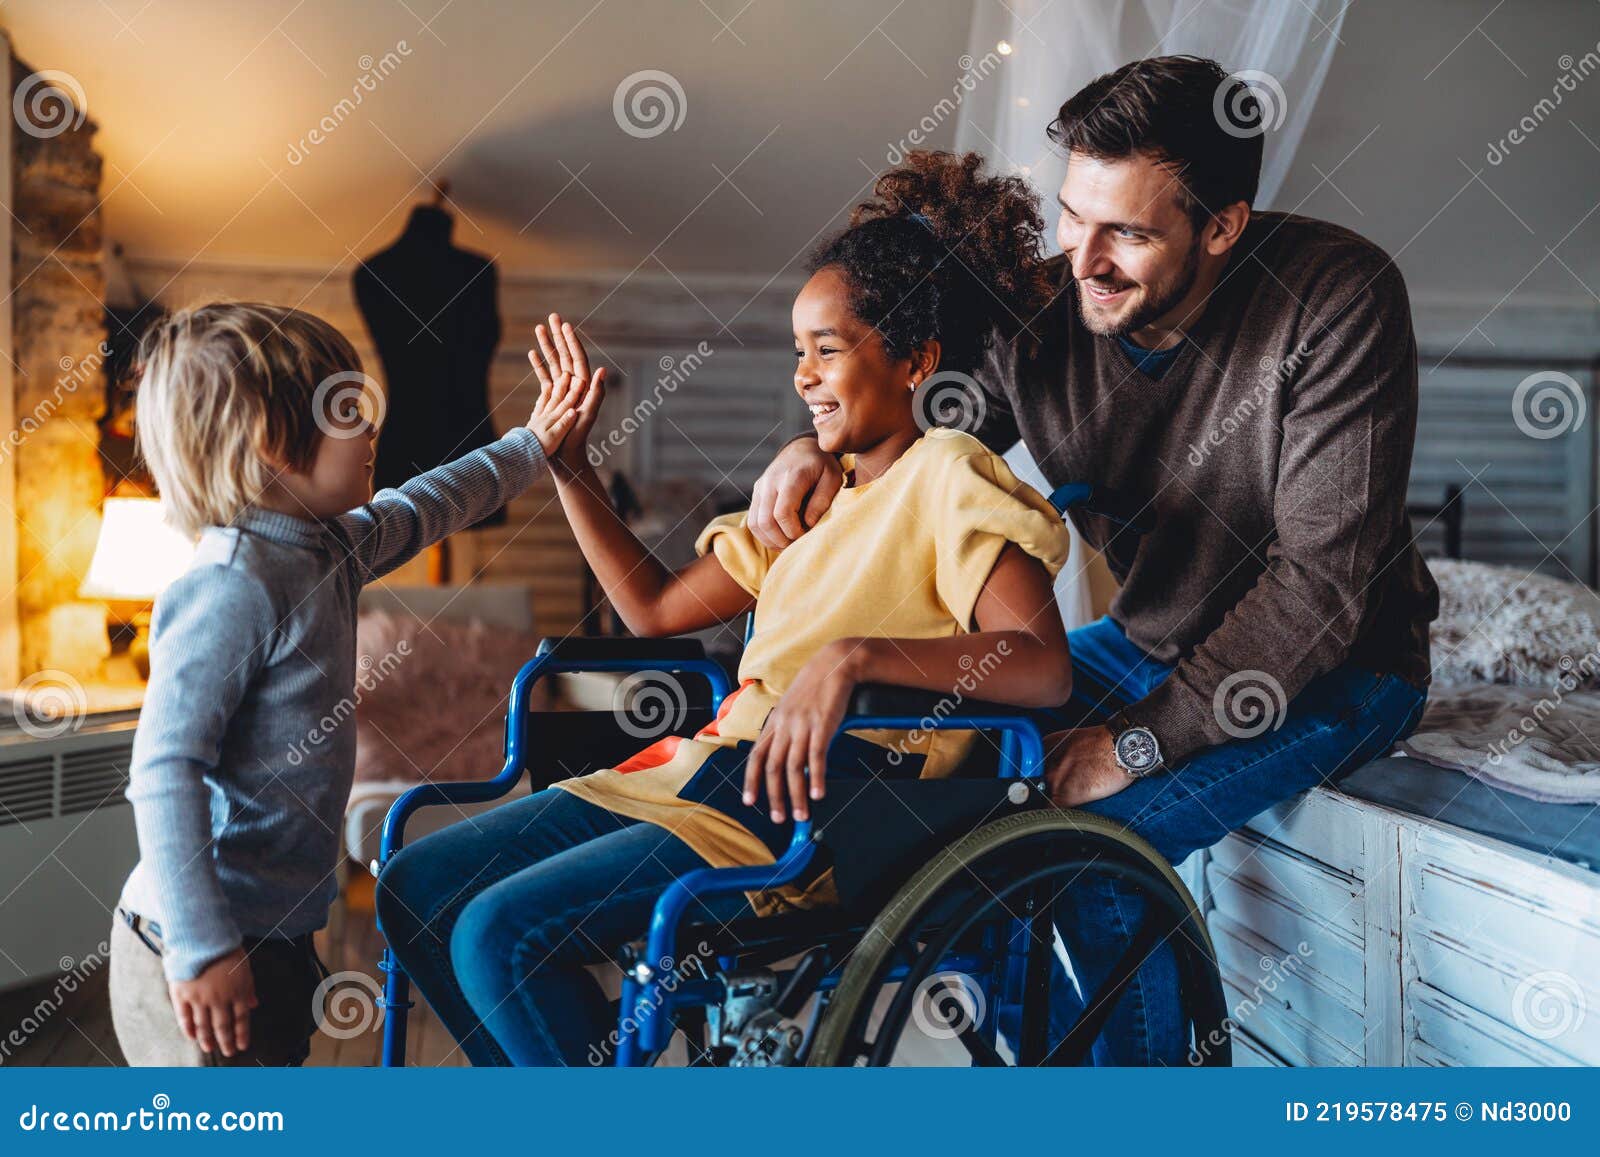 happy multiethnic family. smiling little girl with disability in wheelchair at home